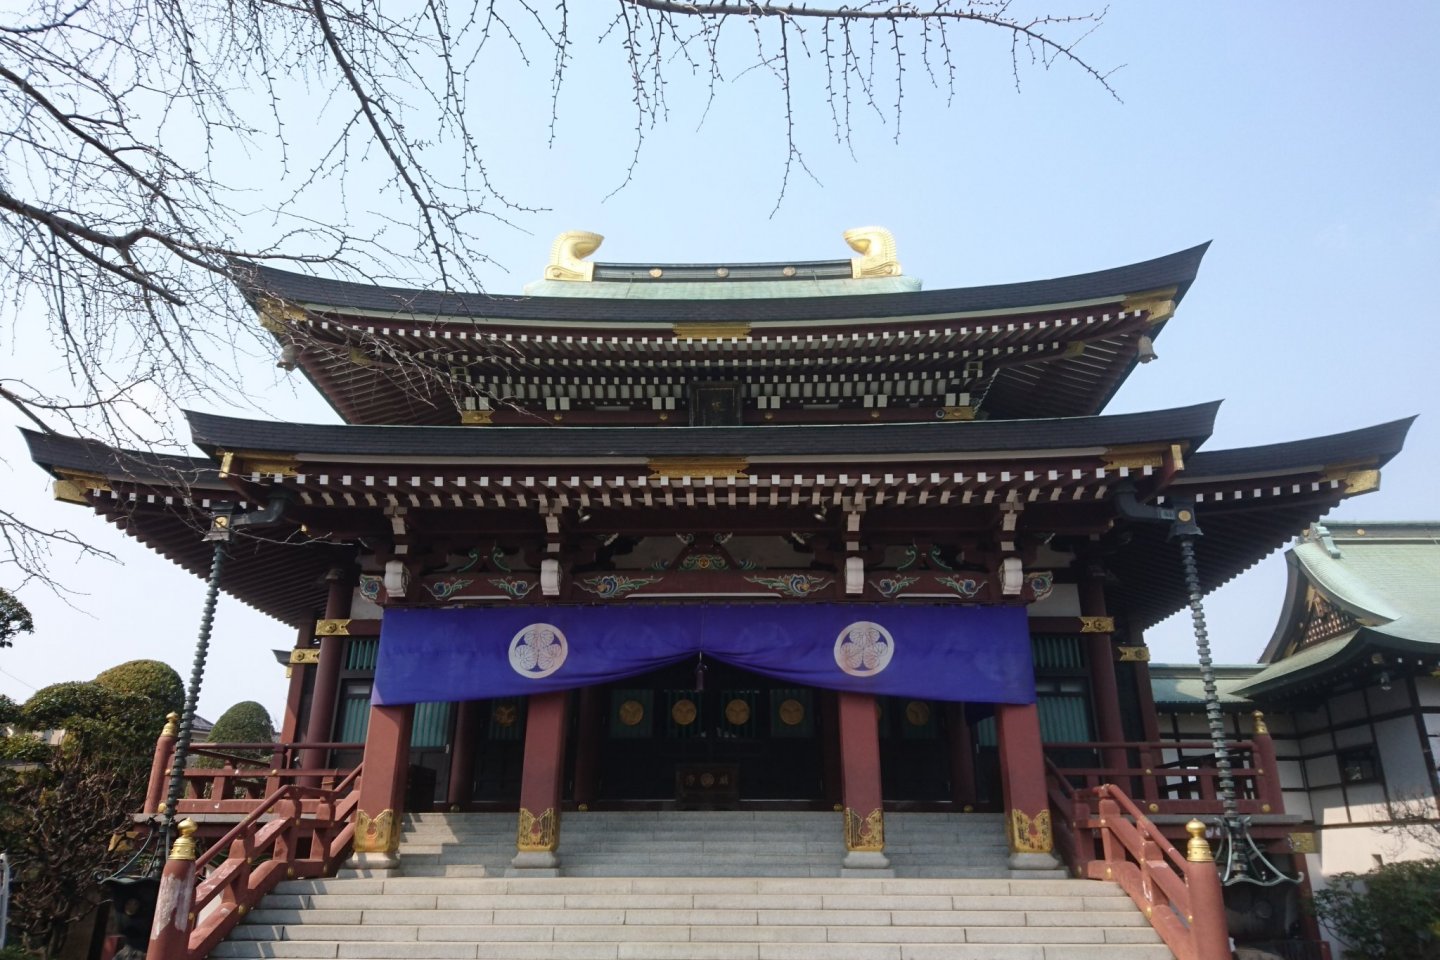 The main of the temple